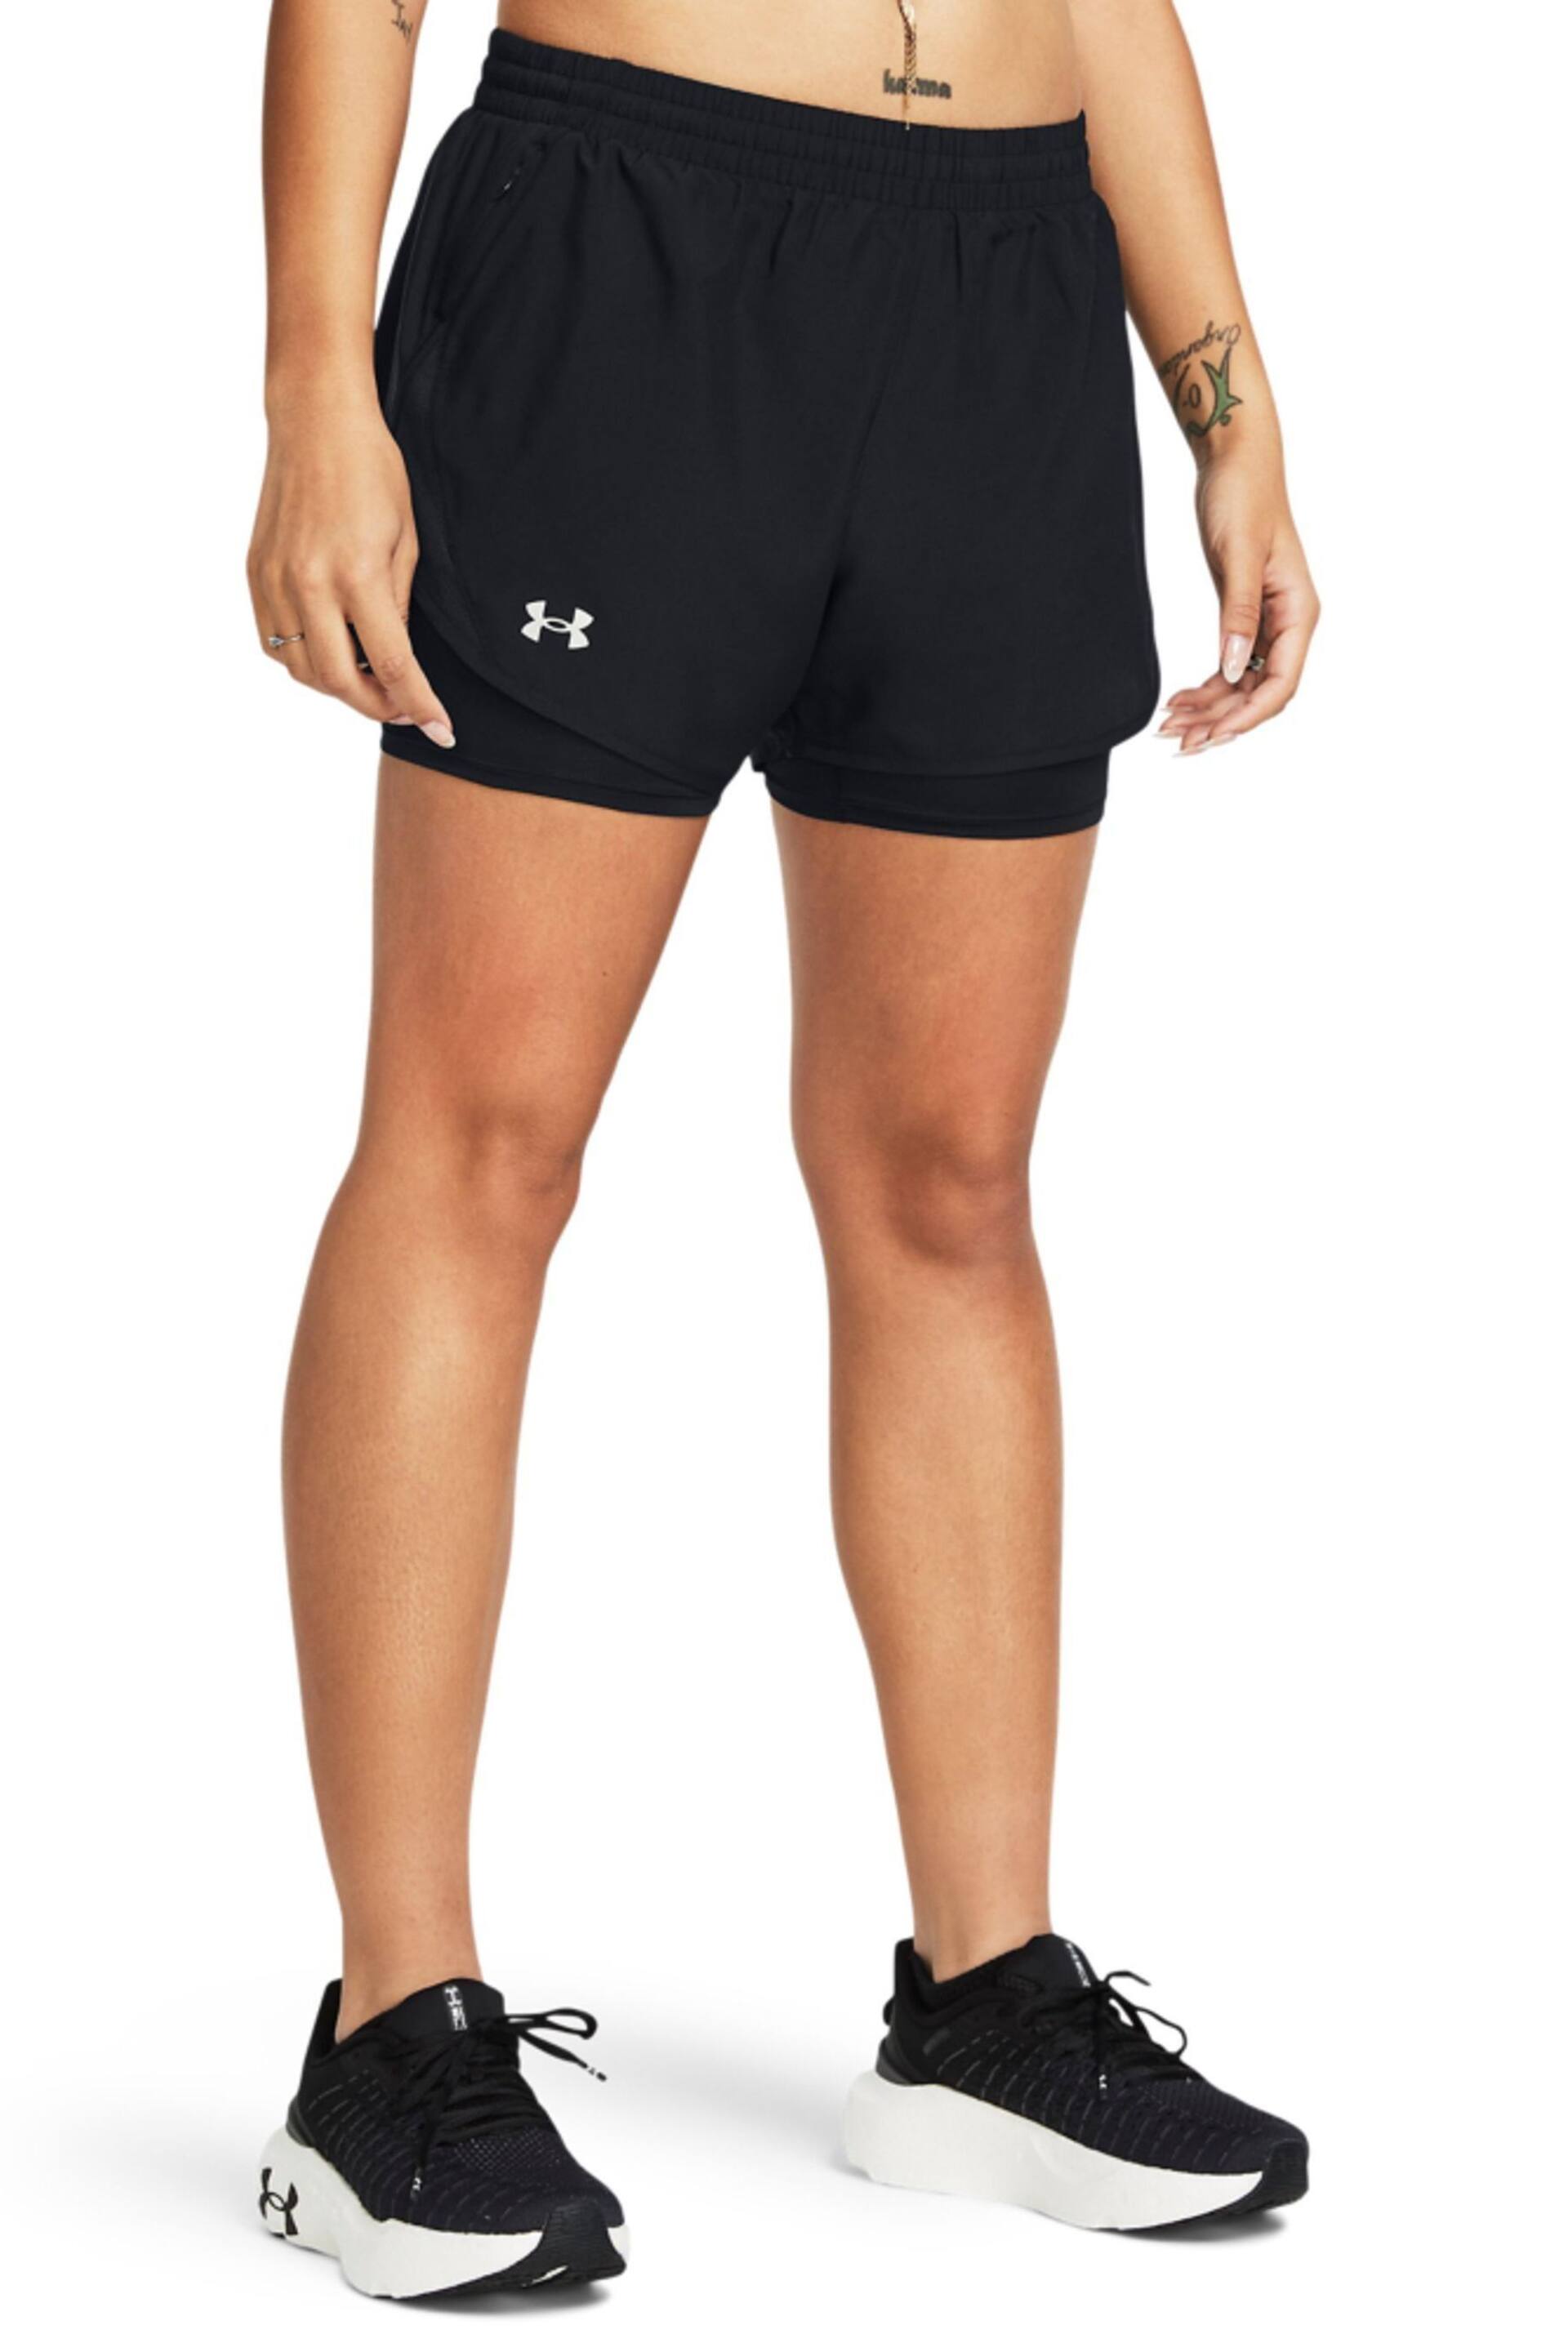 Under Armour Fly By 2 in 1 Black Shorts - Image 1 of 4